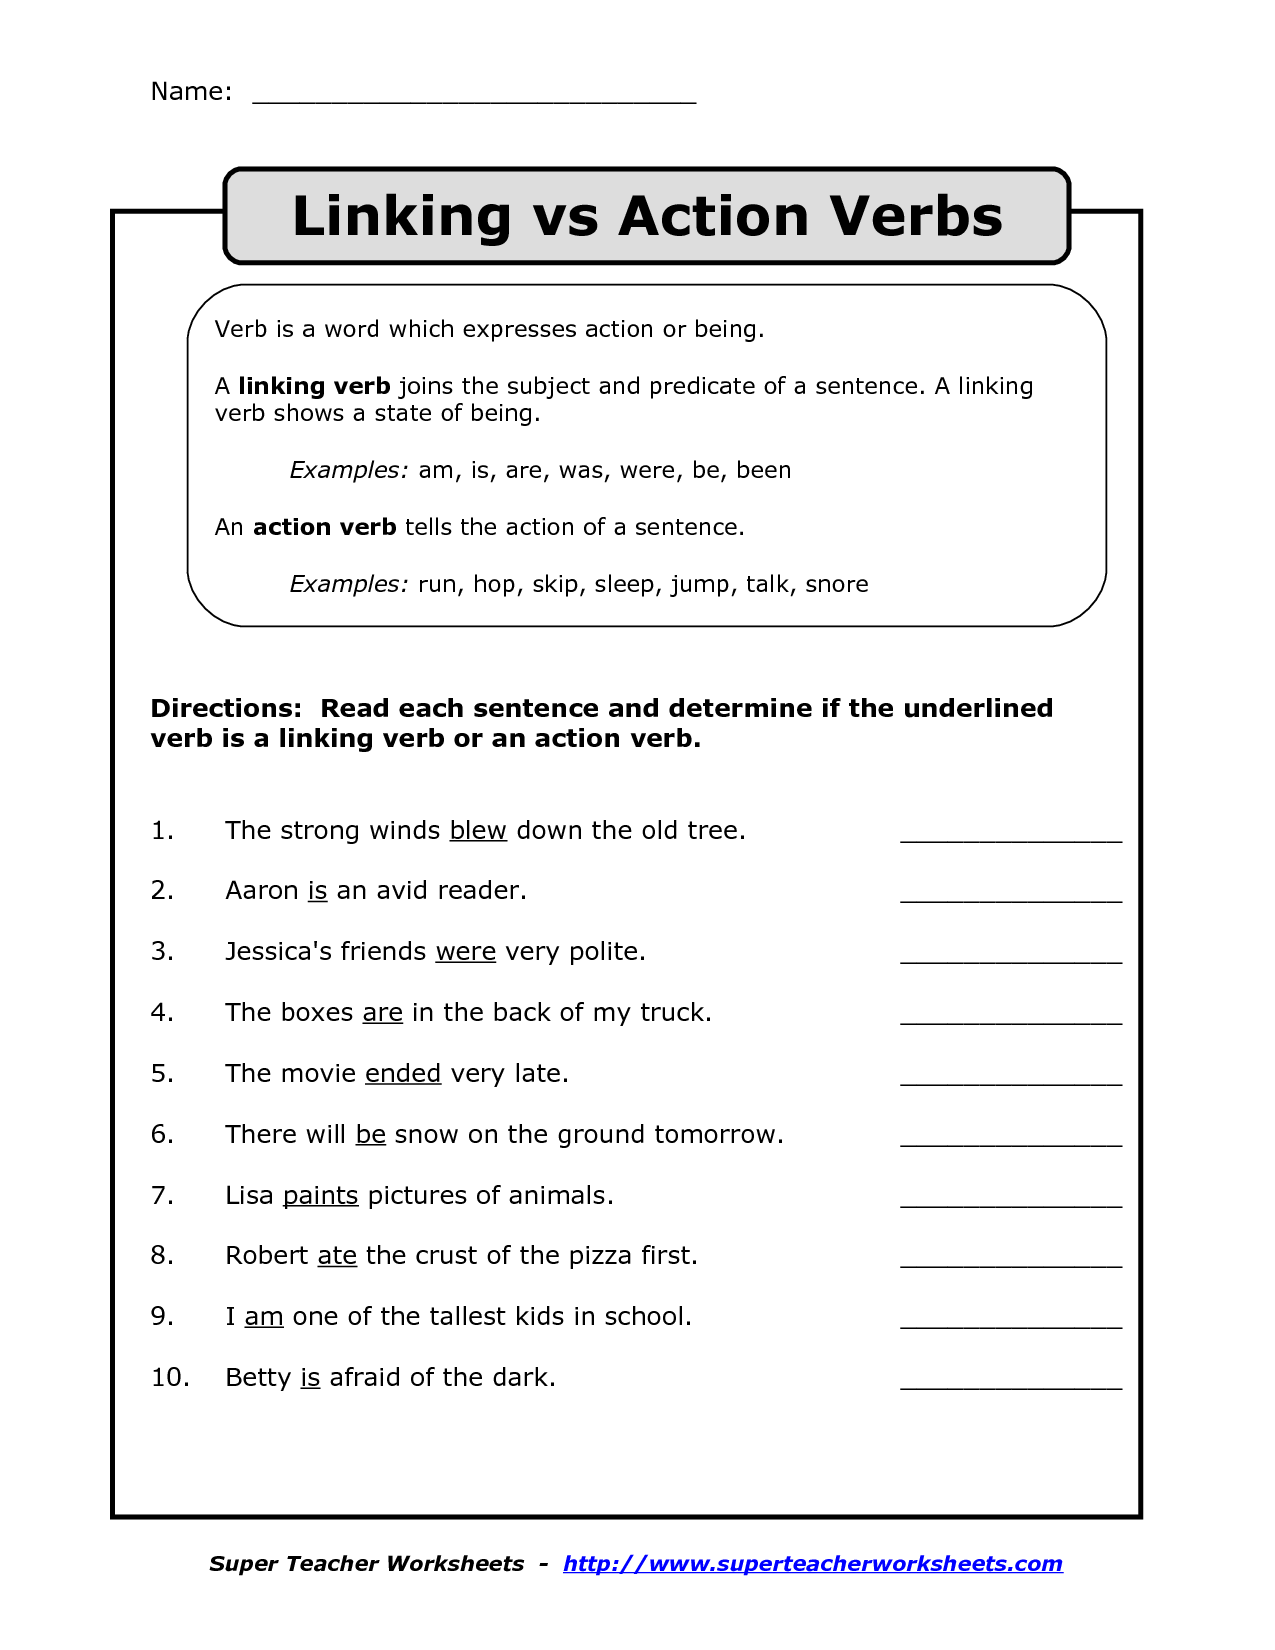 other-worksheet-category-page-95-worksheeto